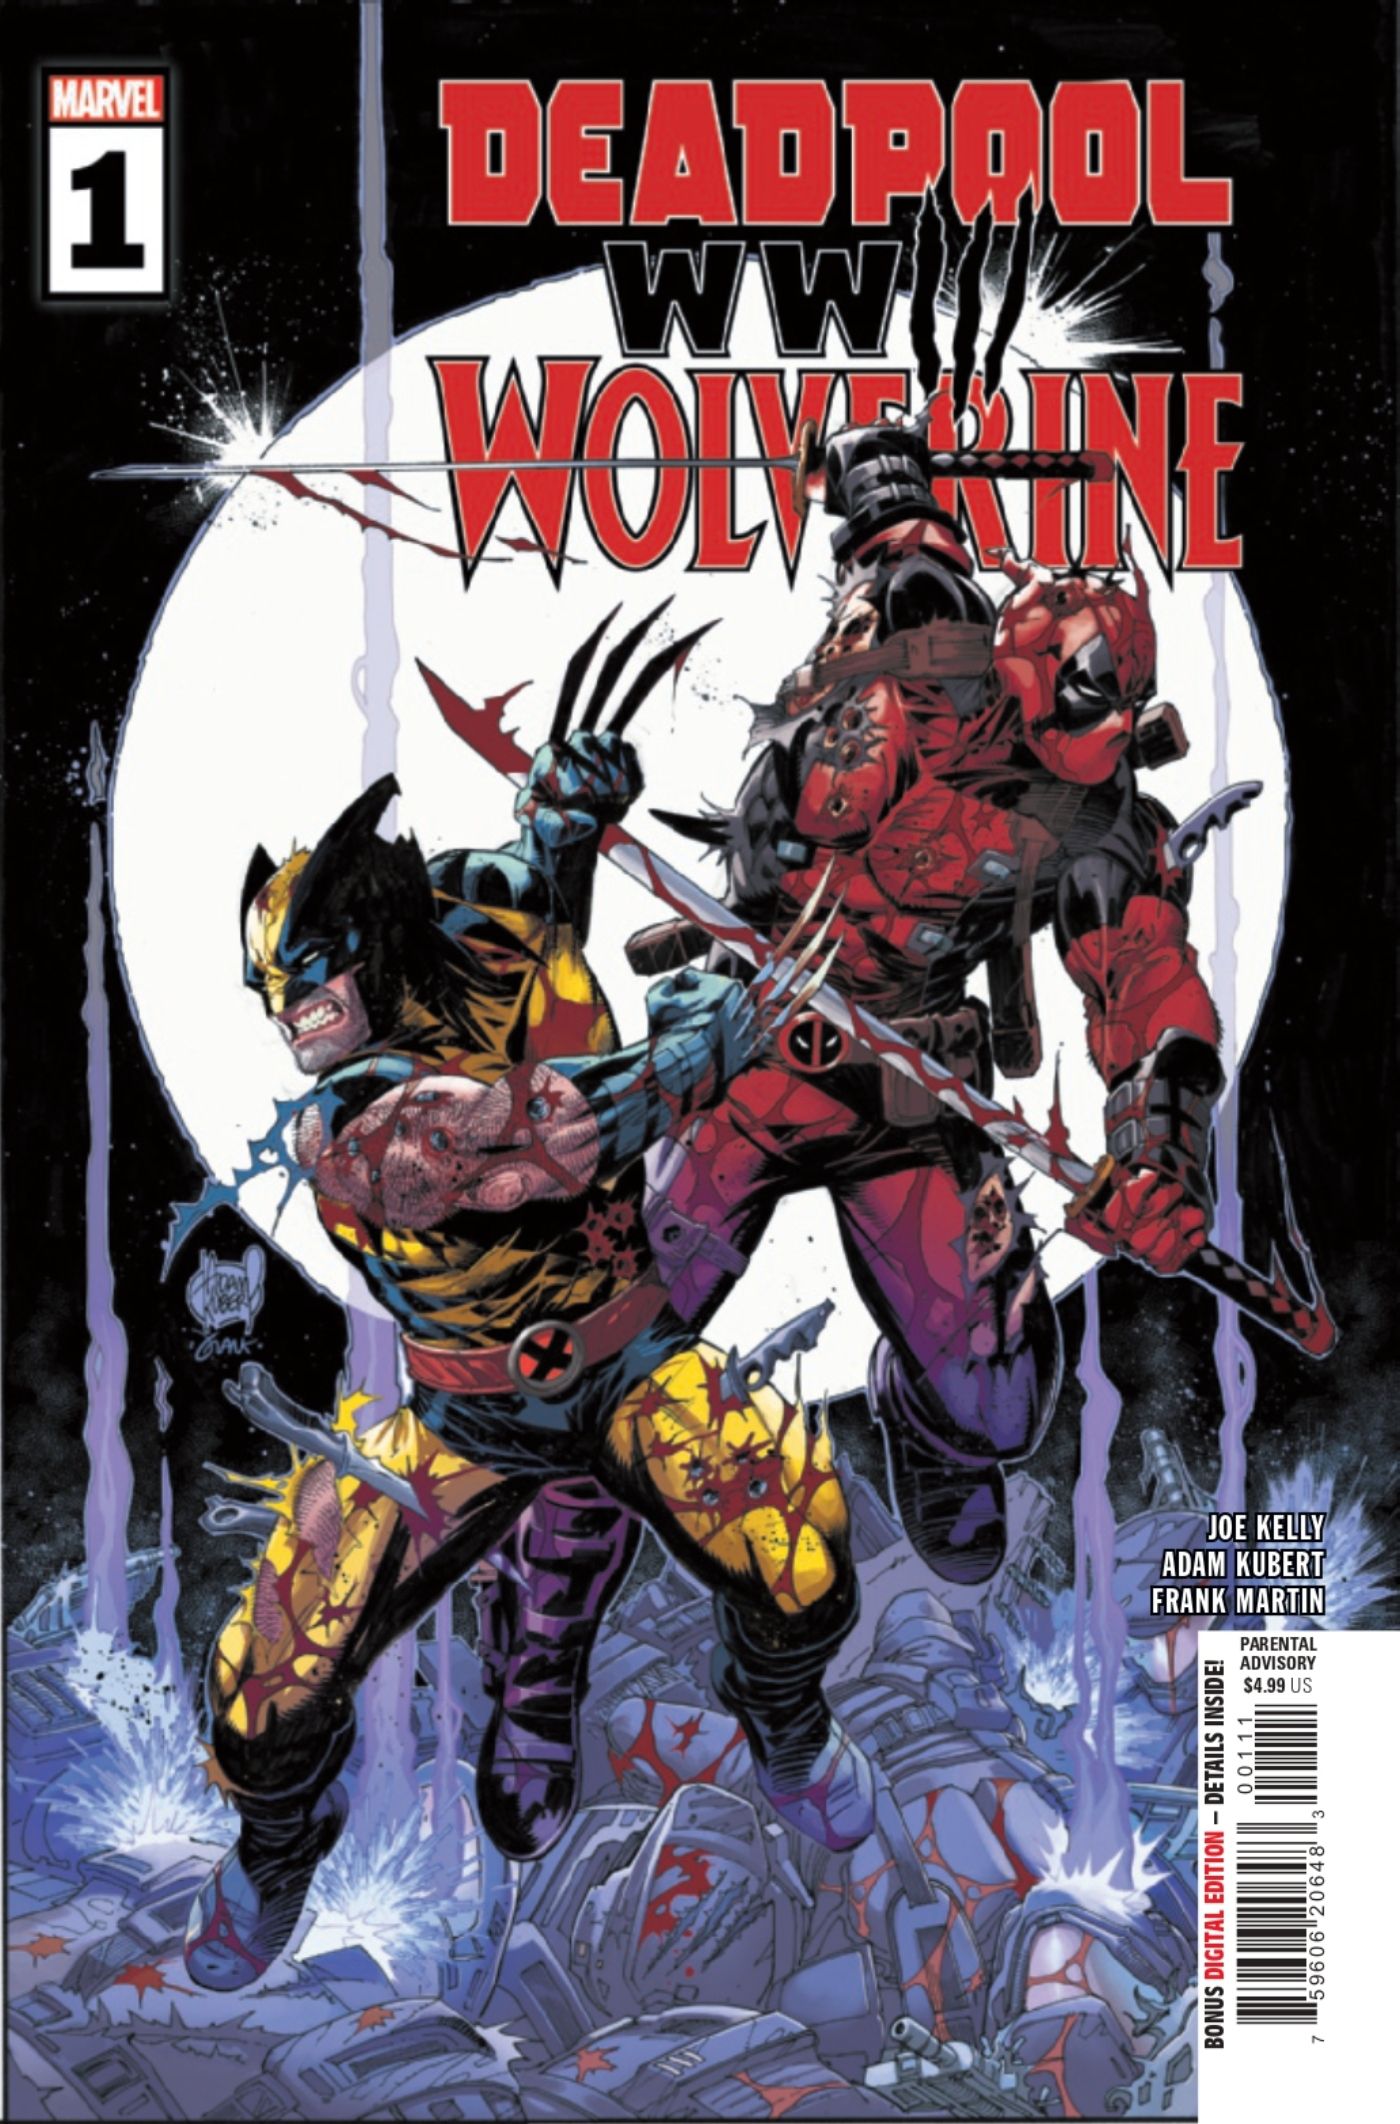 Deadpool & Wolverine: WWIII #1 comic cover featuring Wolverine and Deadpool.